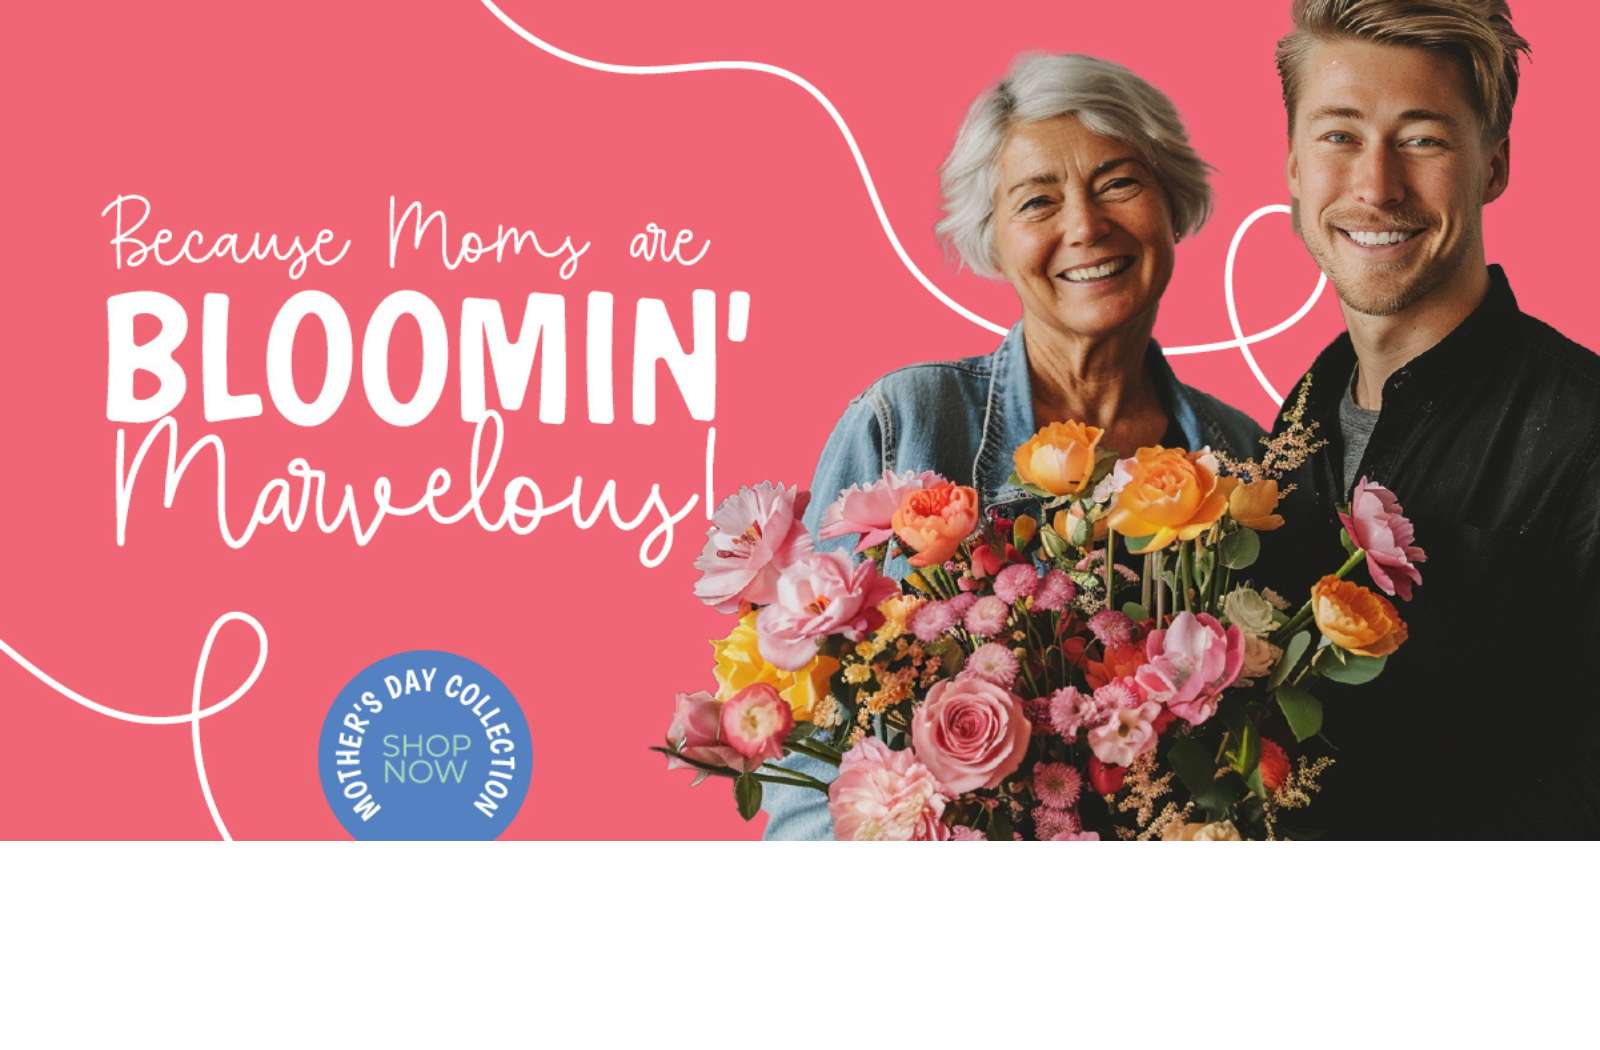 Cheerful elderly mother with silver hair and her son smiling broadly, holding a delightful bouquet of multi-coloured roses and spring flowers, celebrating the Mother's Day Collection at Fabulous Flowers and Gifts.